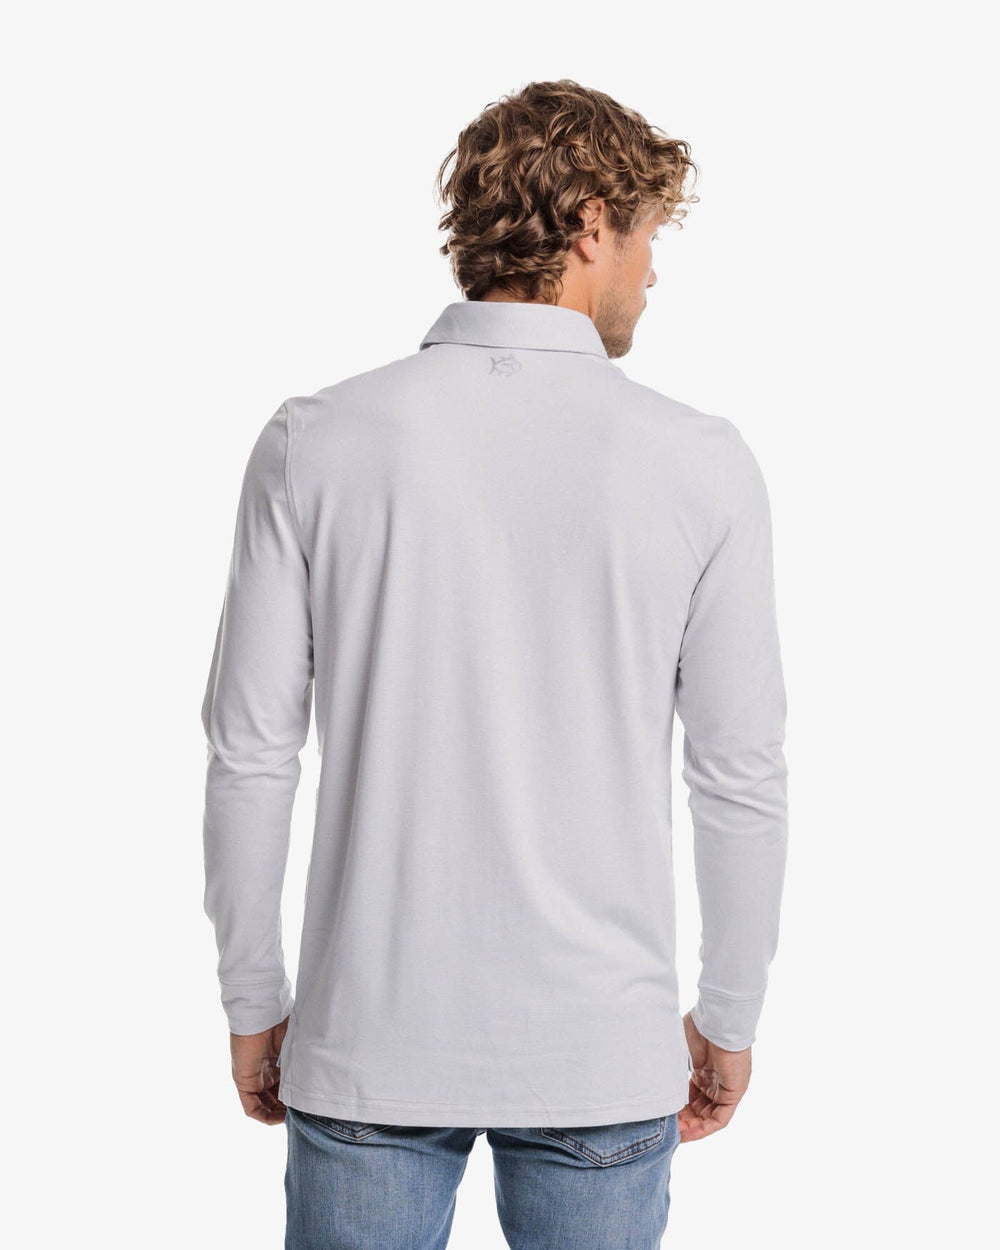 The back view of the Southern Tide Ryder Heather Ridgeway Stripe Long Sleeve Performance Polo by Southern Tide - Heather Platinum Grey